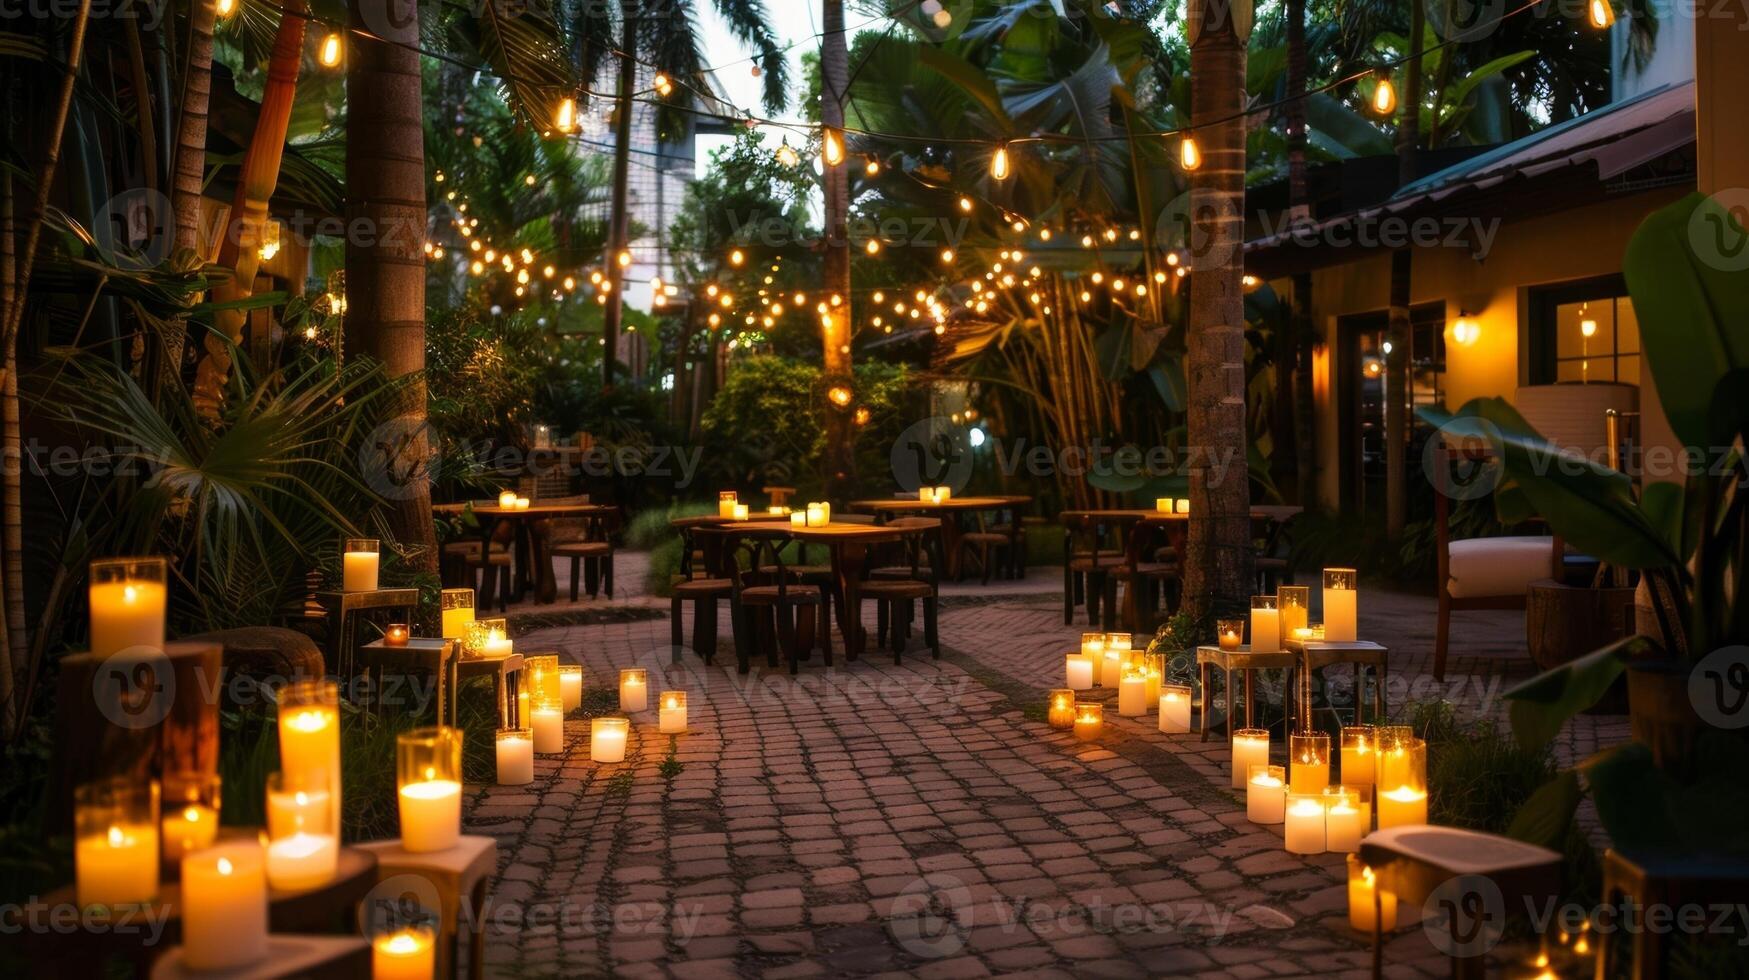 As the sun sets the outdoor space becomes delicately illuminated by a sea of candles setting the perfect ambiance for a mixology class. 2d flat cartoon photo